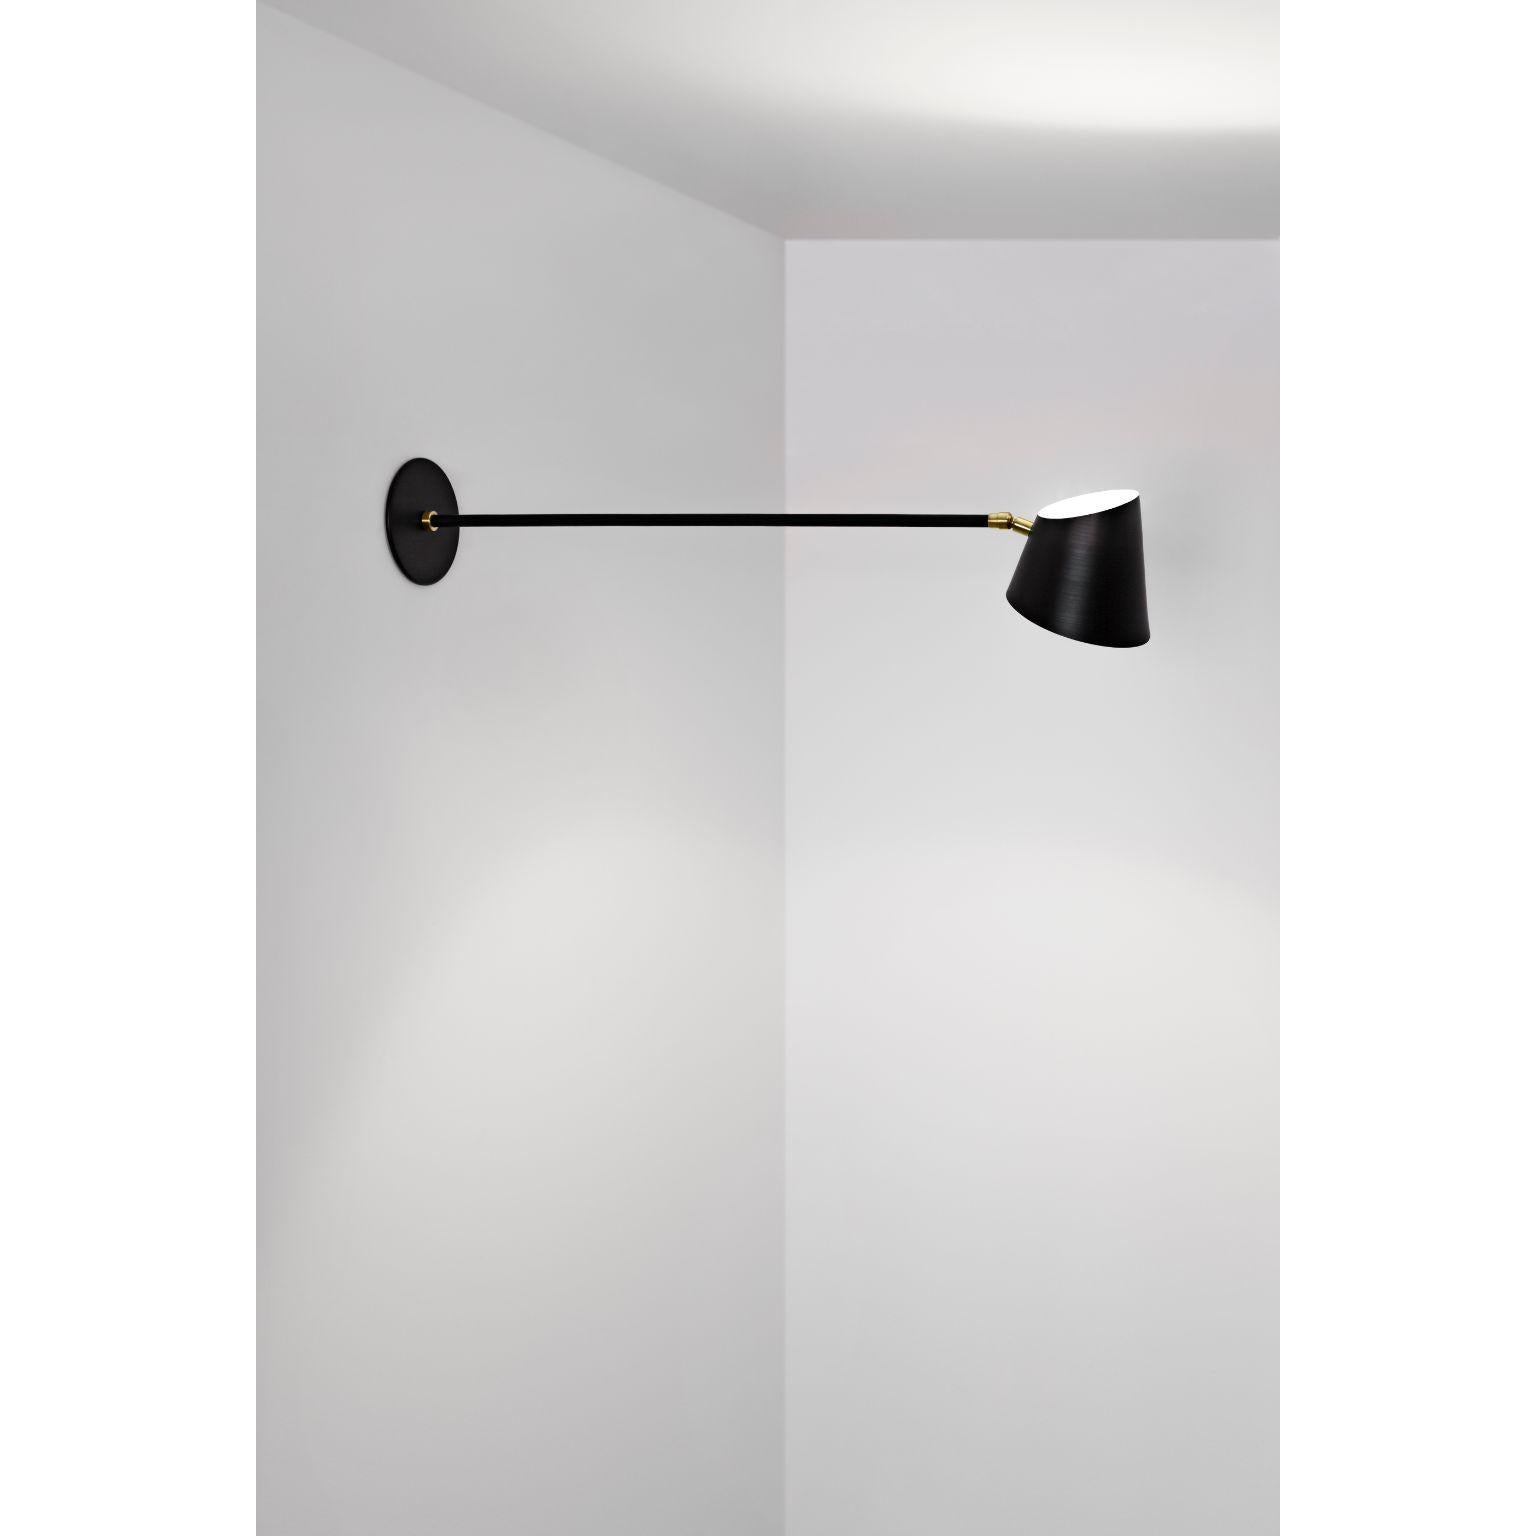 Hartau Wall by Studio d'Armes
Design by Alexandre Joncas
Dimensions: 60 x h 16 cm
Materials: Frosted Glass, Brass, Painted Aluminium

The Hartau series brings together classical light fittings that are, at first glance, astonishing in their